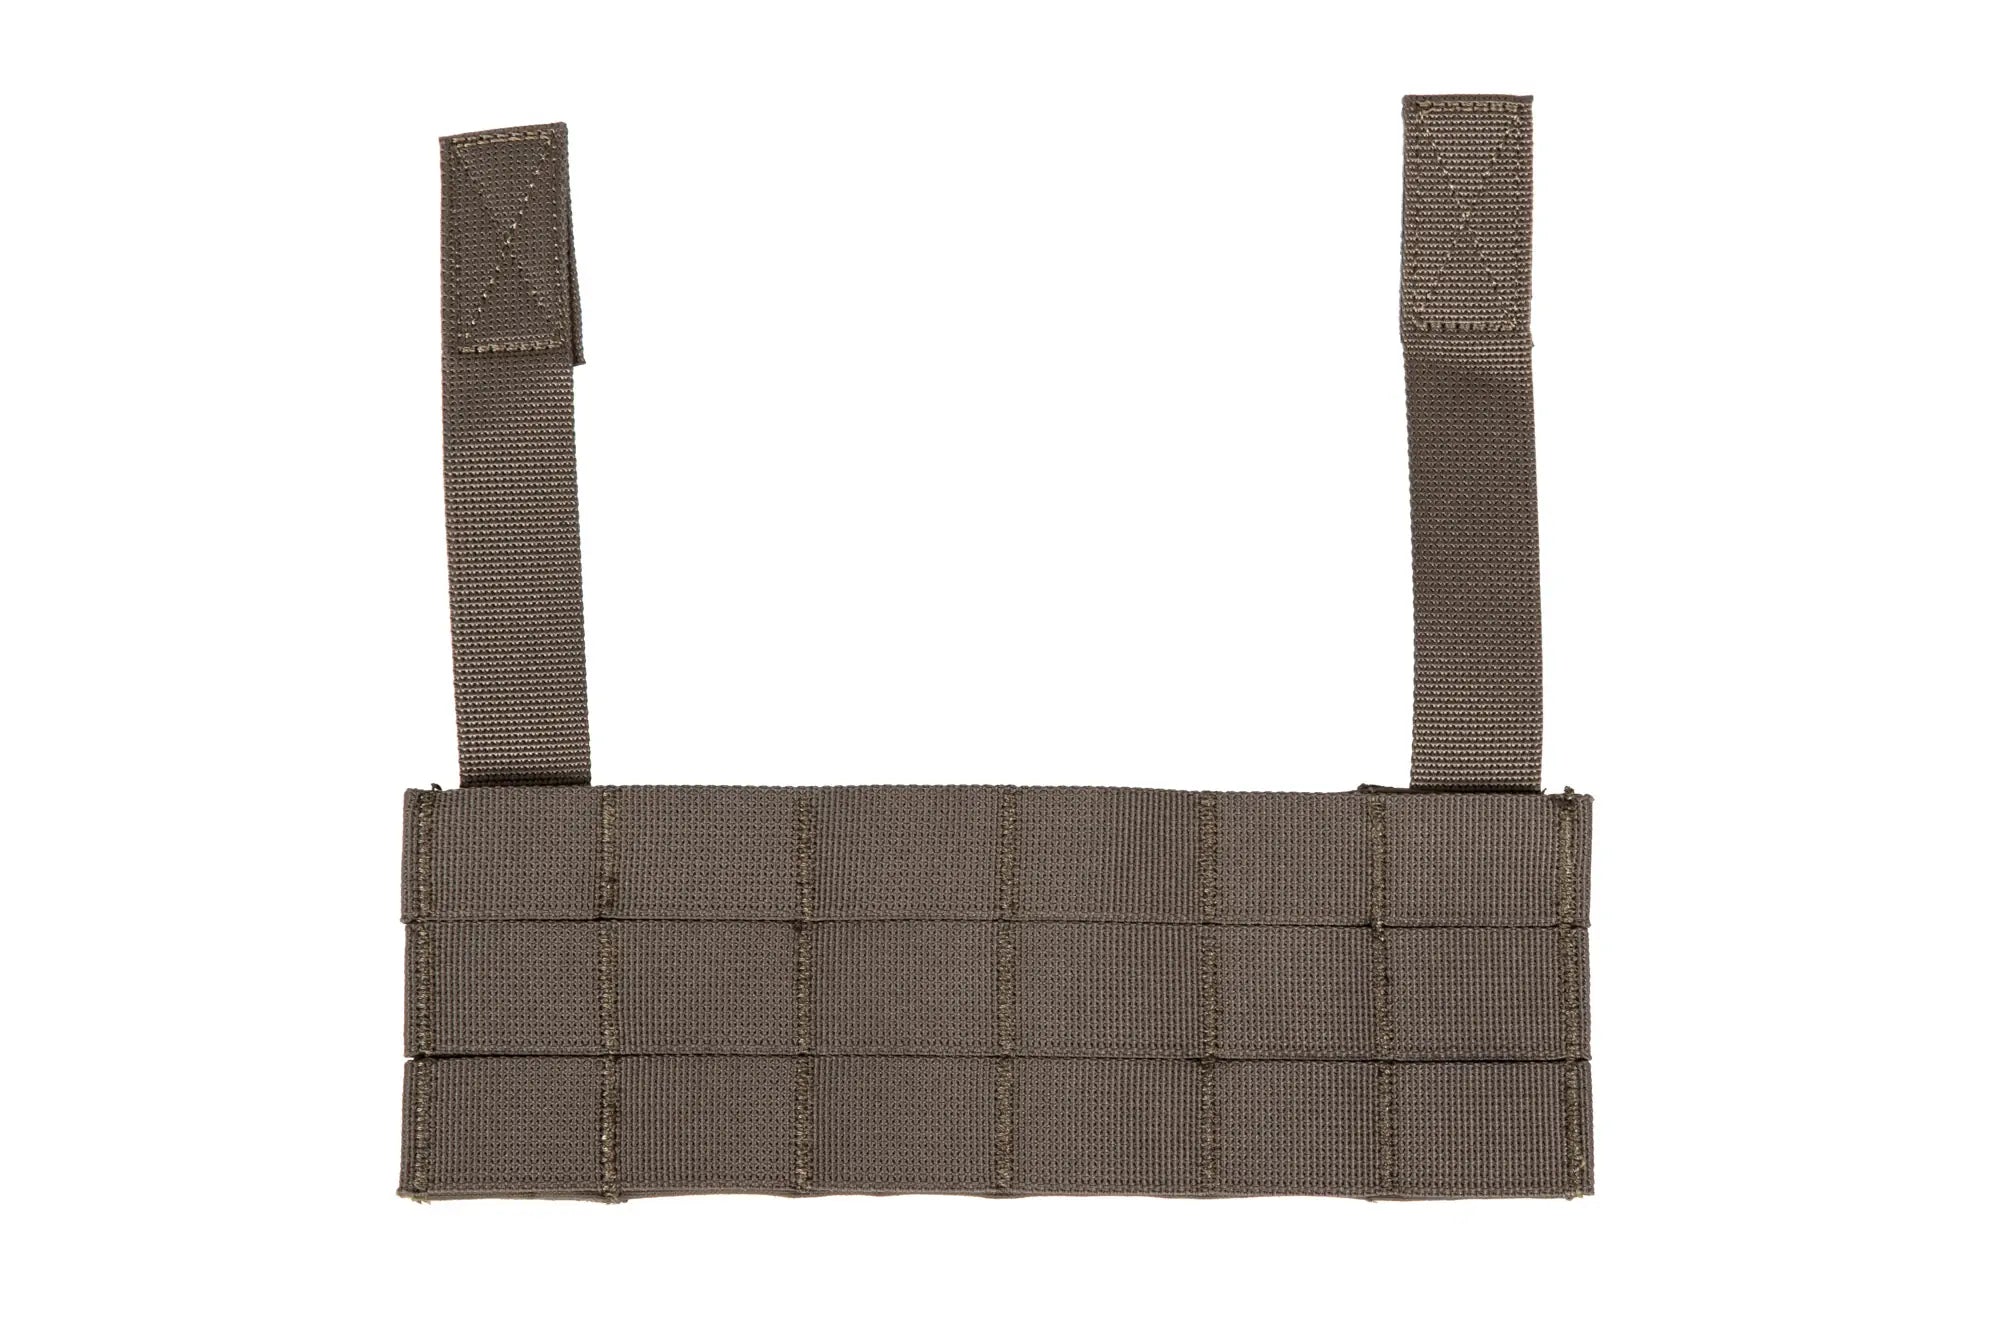 Additional Molle panel for Wosport Ranger Green Chest Rig waistcoats